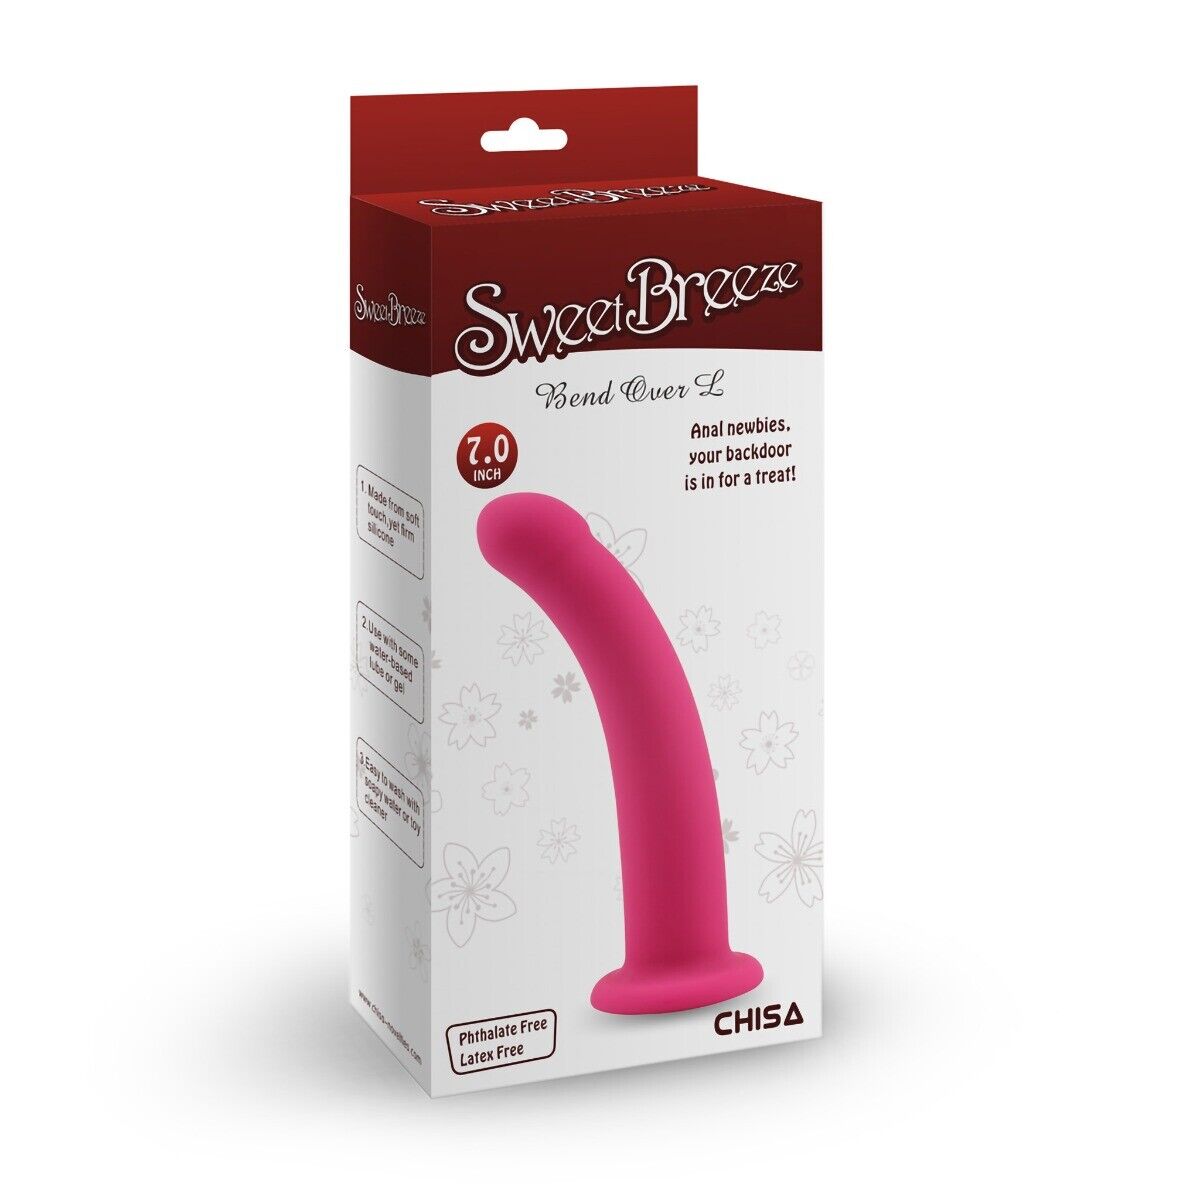 Pink Silicone Anal G-spot Dildo Dong Plug Probe Suction Cup Harness Compatible